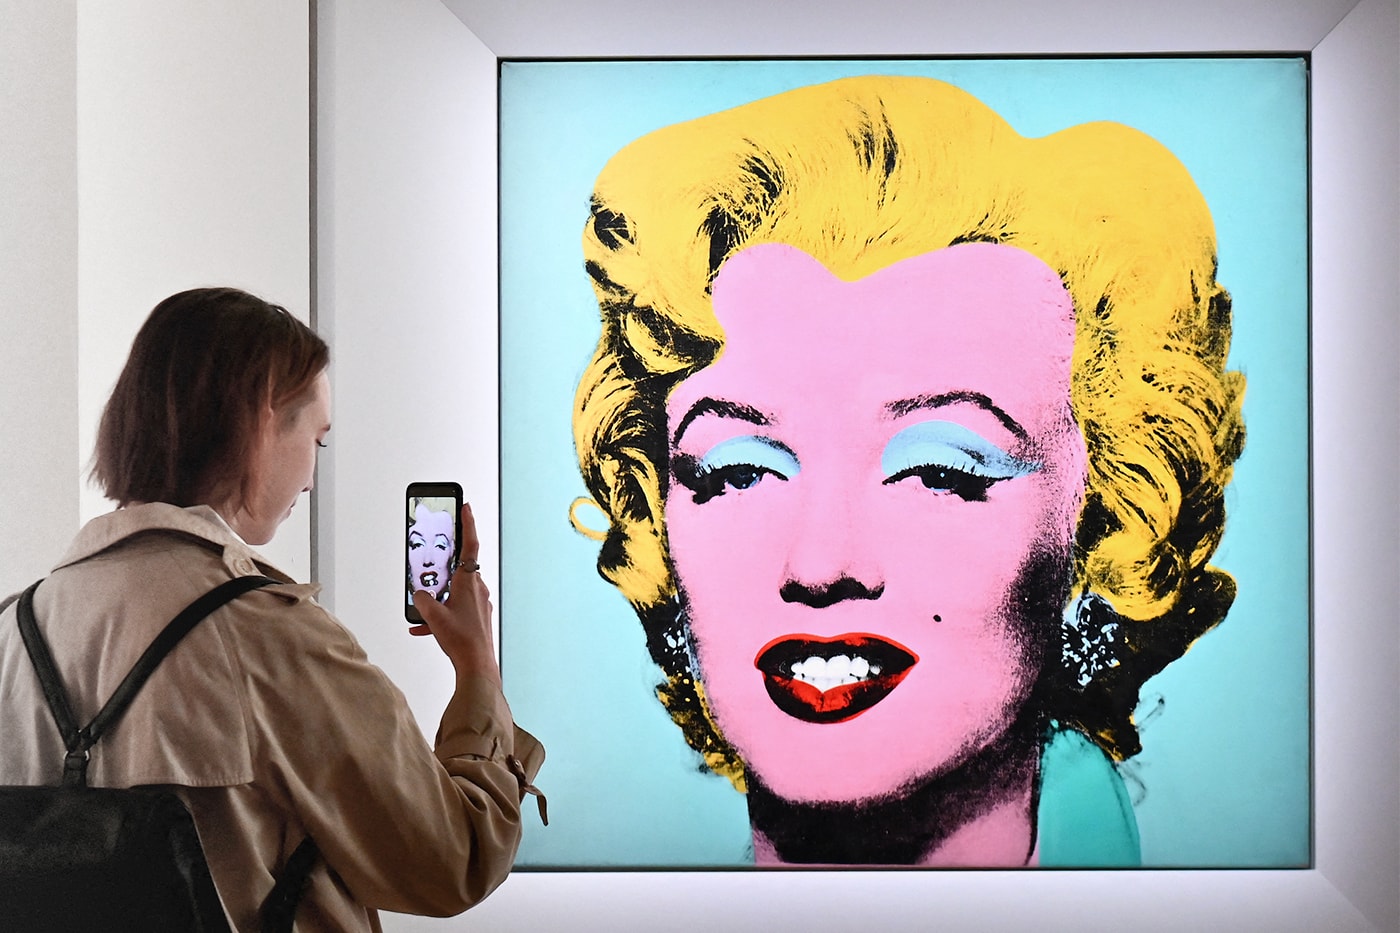 Andy Warhol's Marilyn Monroe Painting Sold for Record-Breaking $195 Million USD Shot Sage Blue Marilyn christie's auction nyc silk screen contemporary 20th-century art